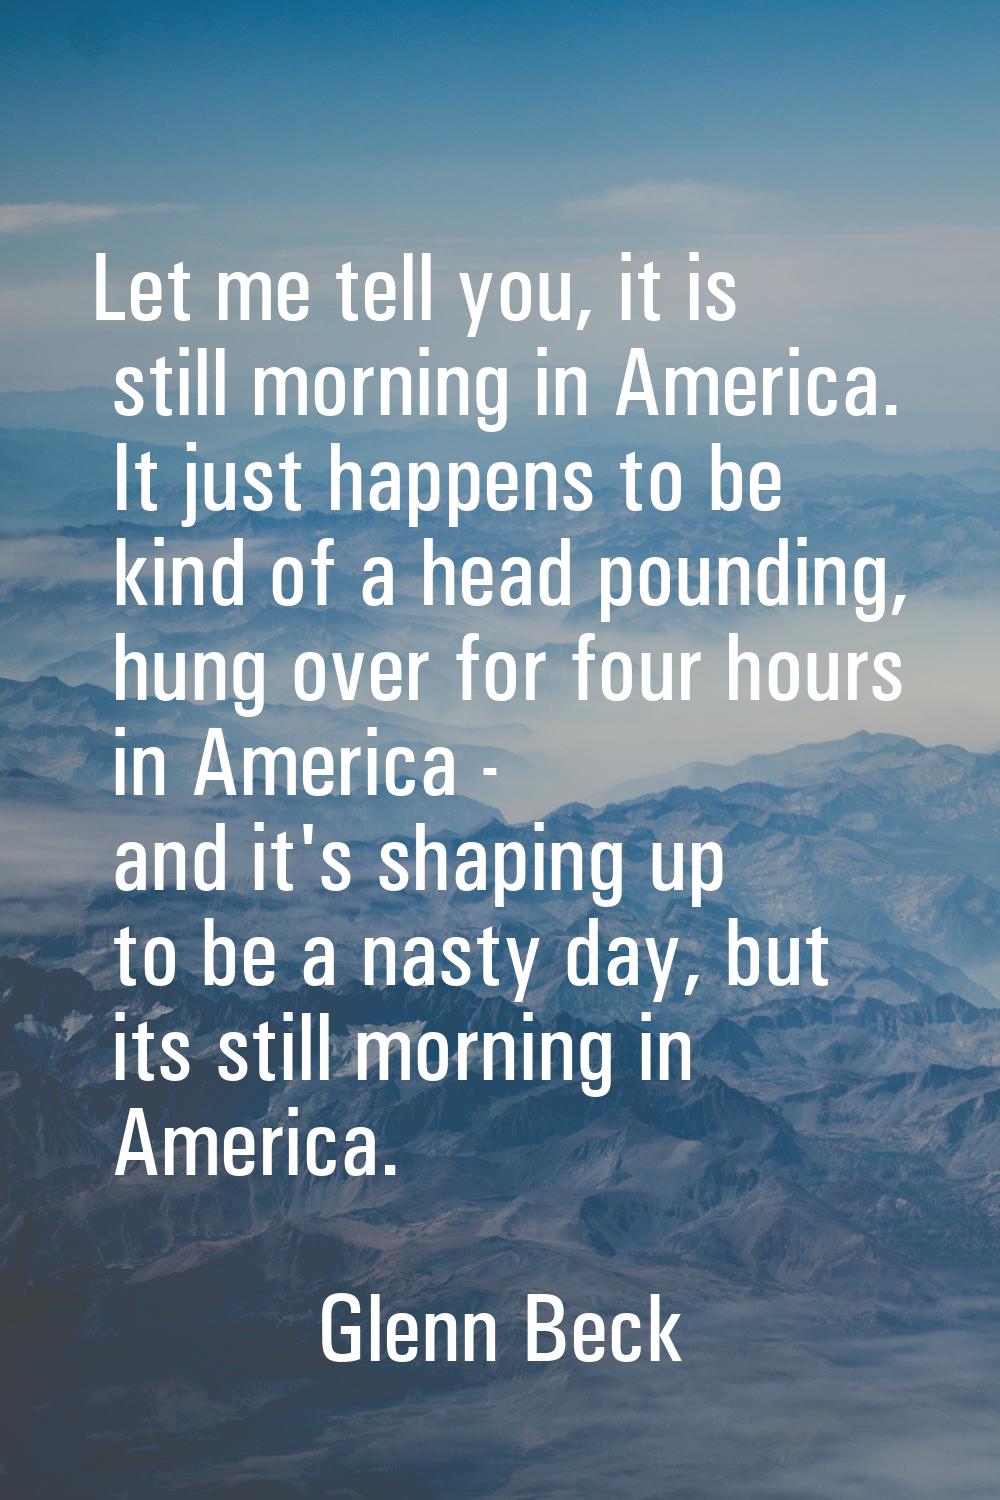 Let me tell you, it is still morning in America. It just happens to be kind of a head pounding, hun